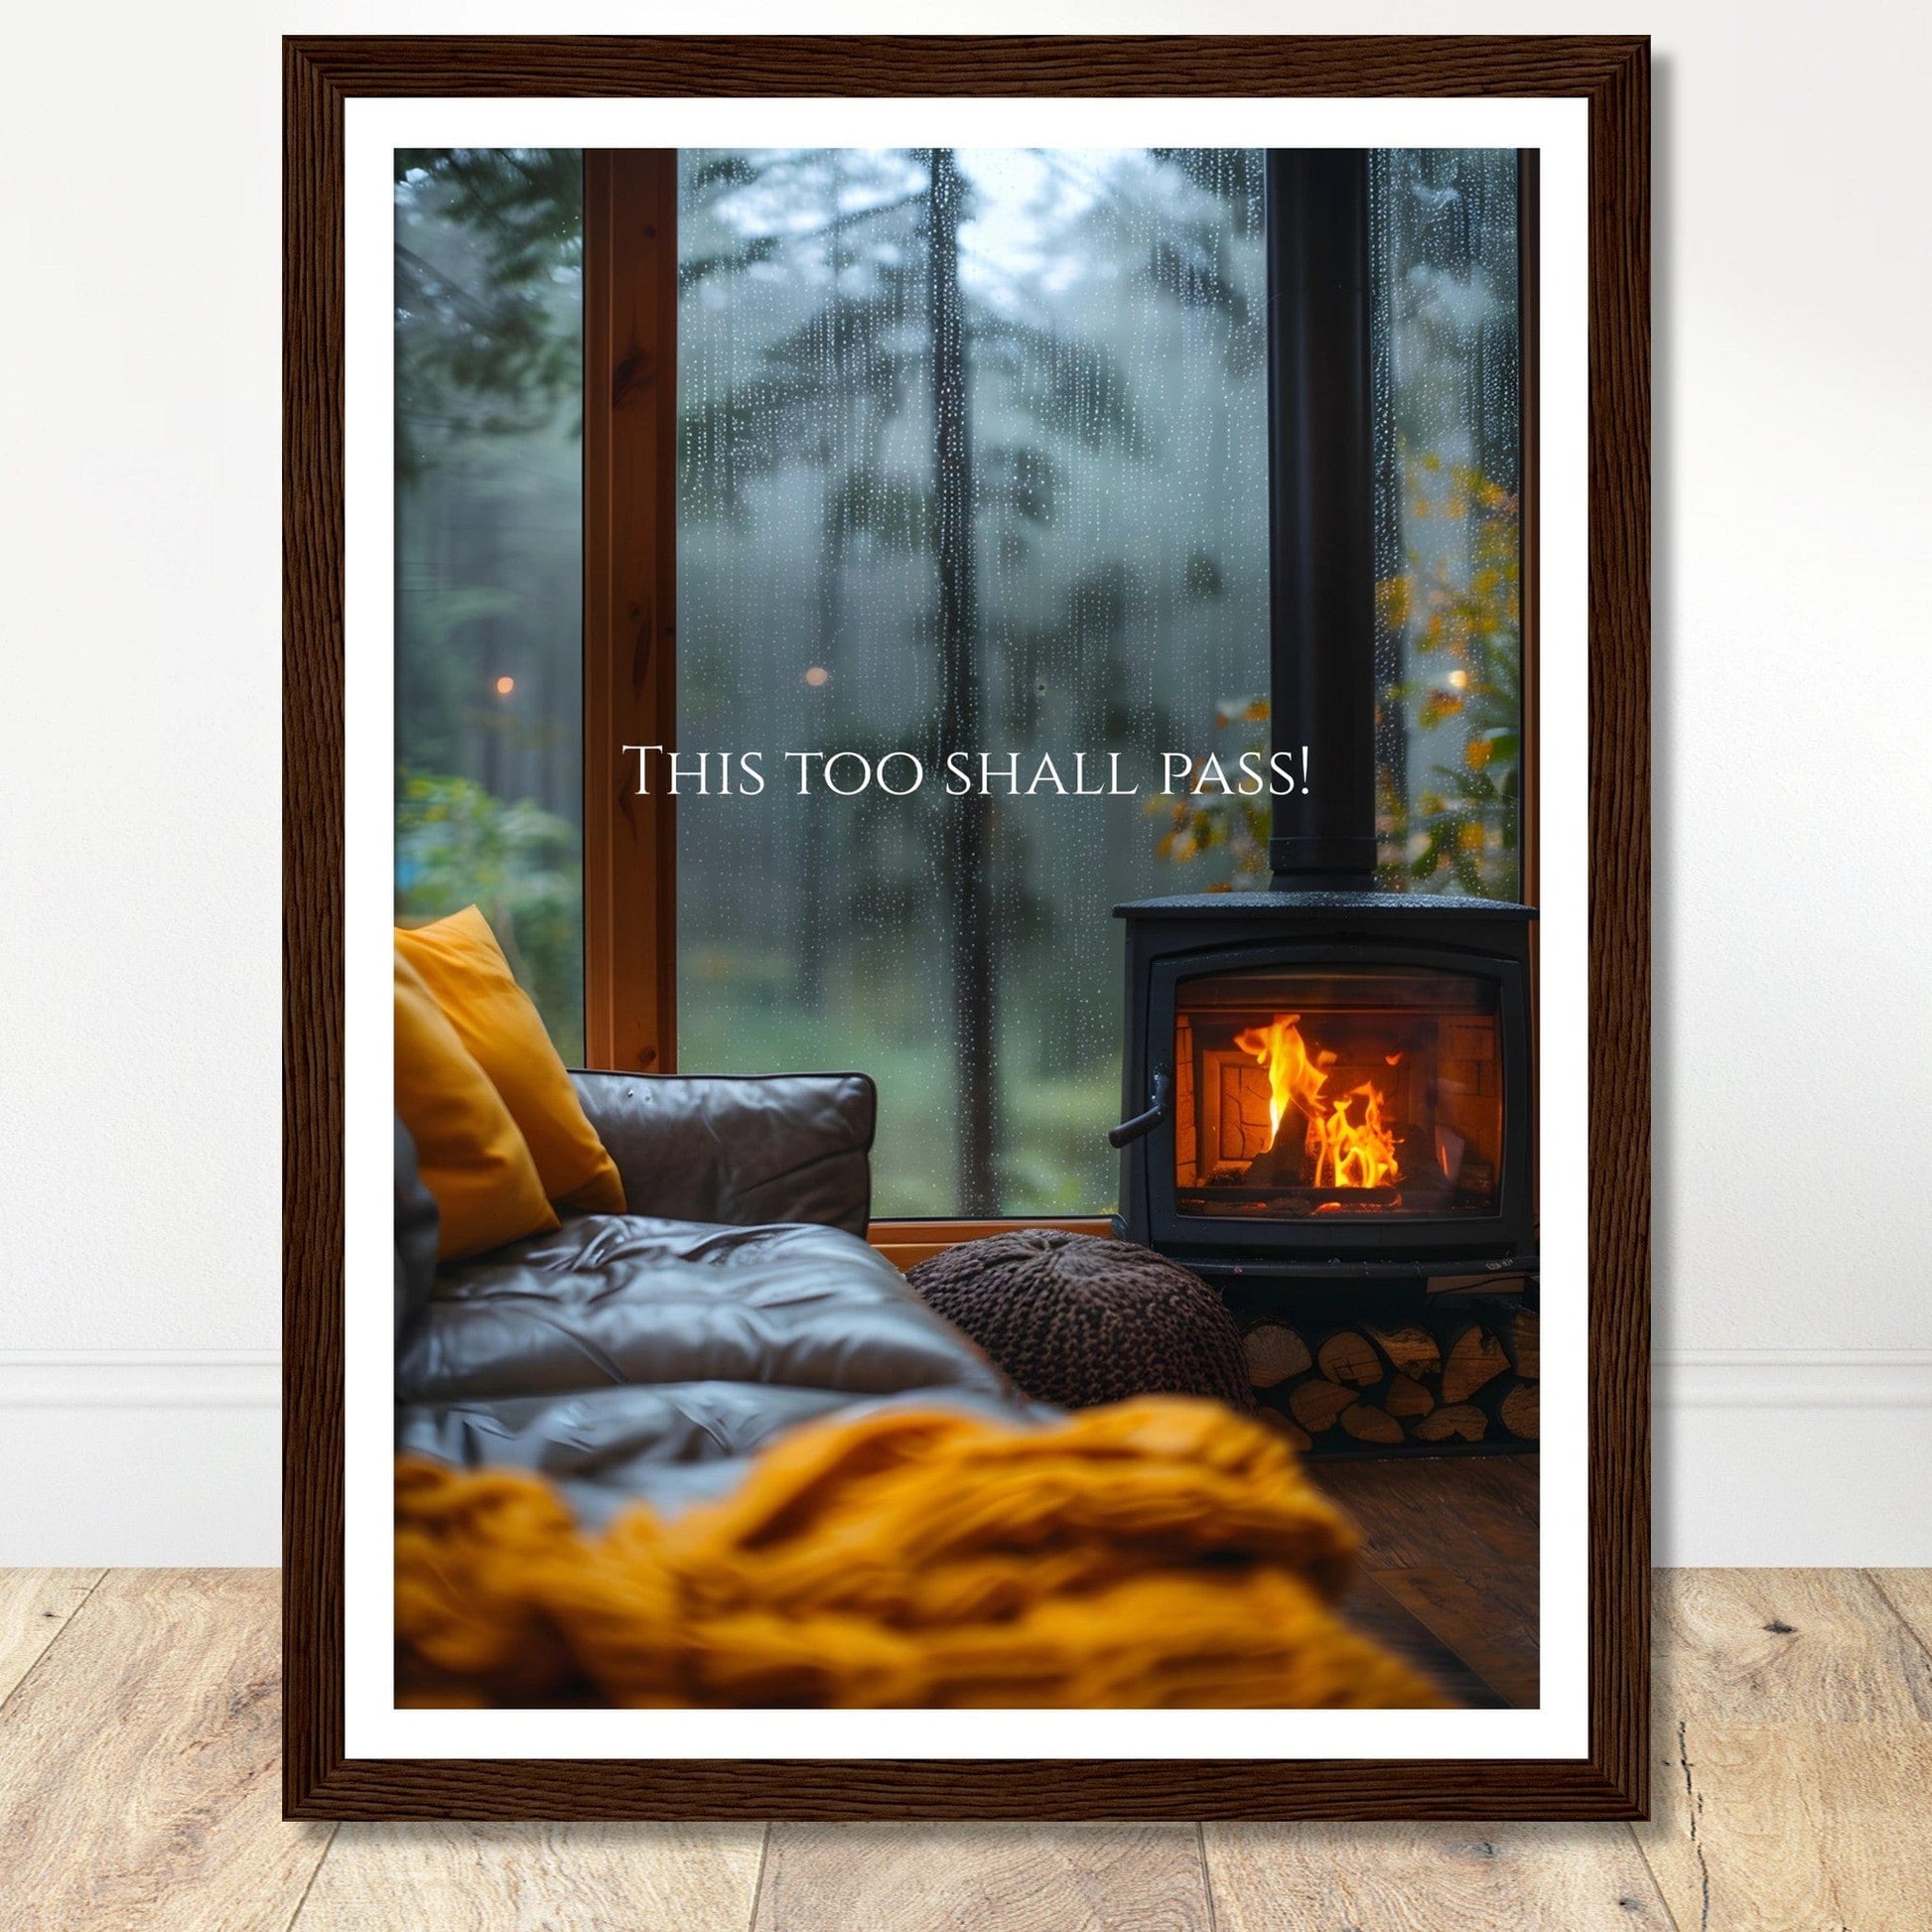 Coffee With My Father Print Material 30x40 cm / 12x16″ / Framed / Dark wood frame This Too Shall Pass - Custom Art